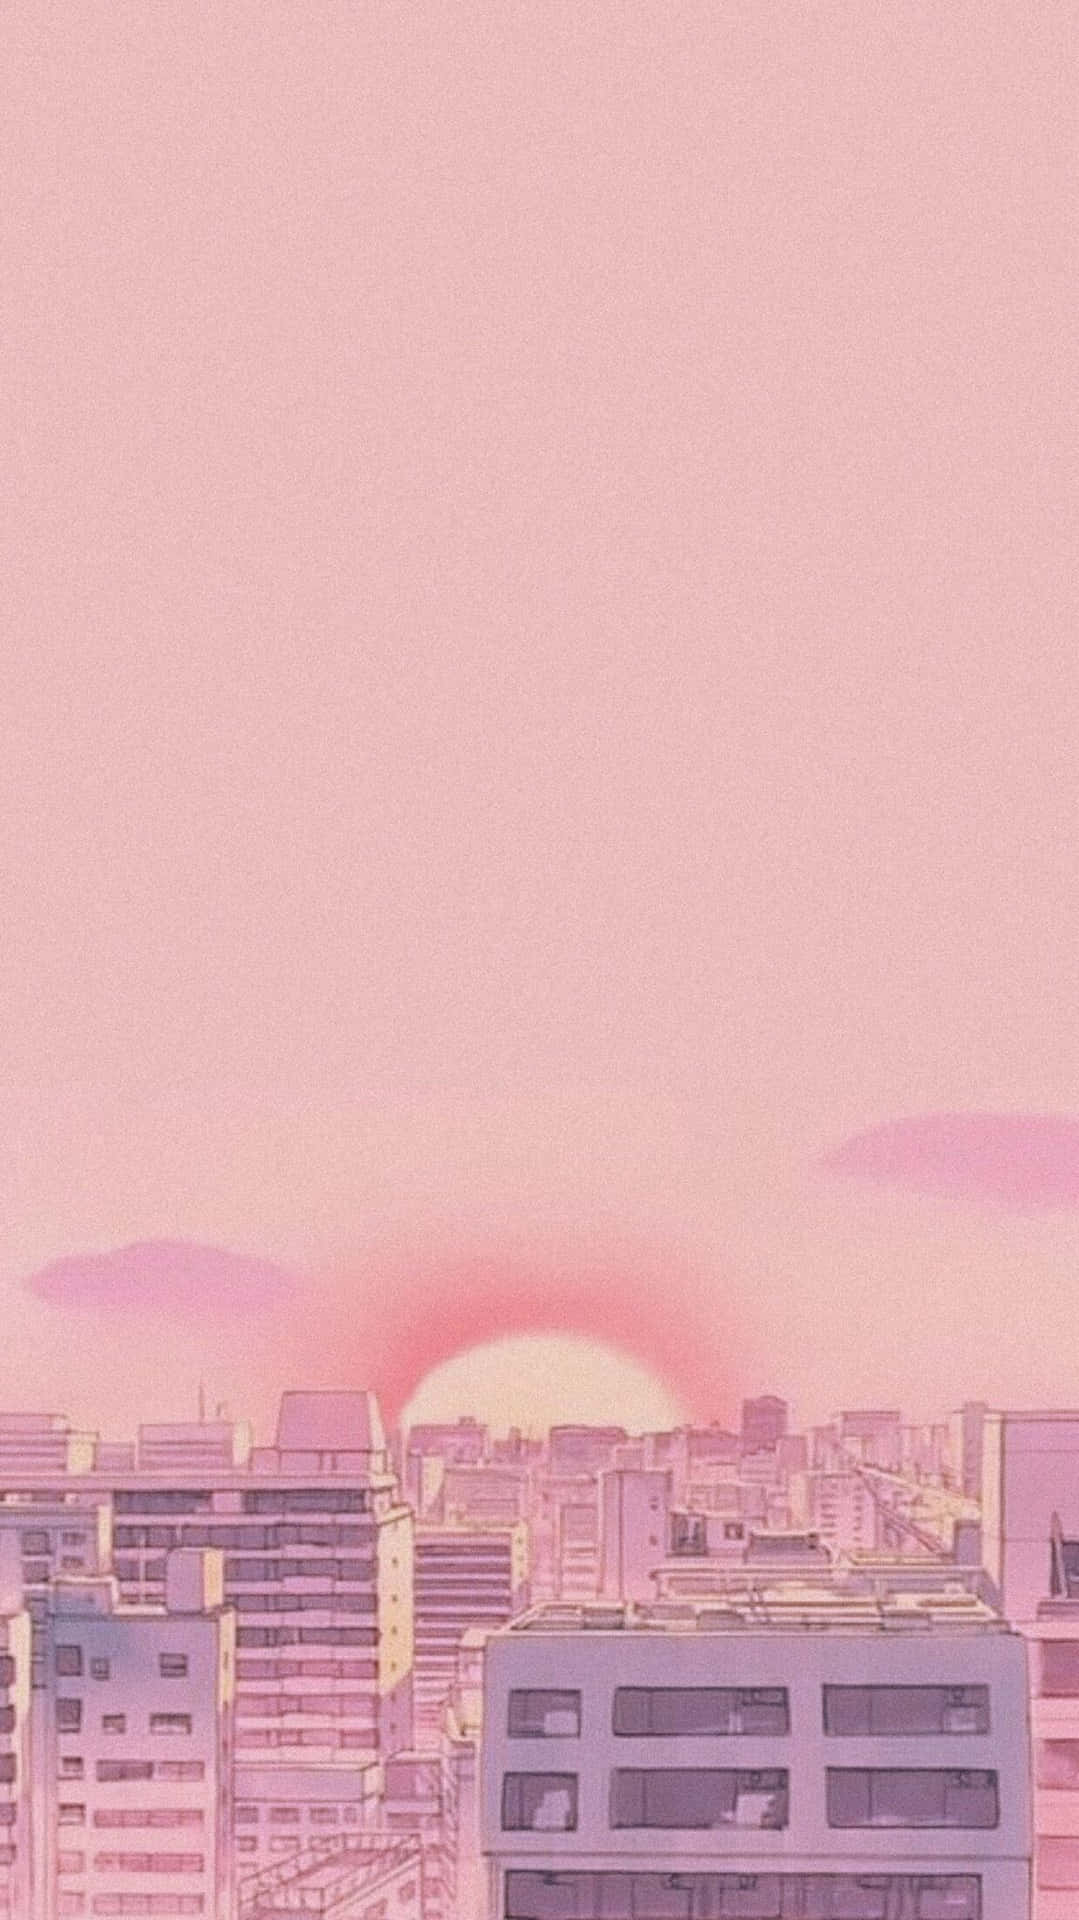 100+] Pink Aesthetic Anime Phone Wallpapers